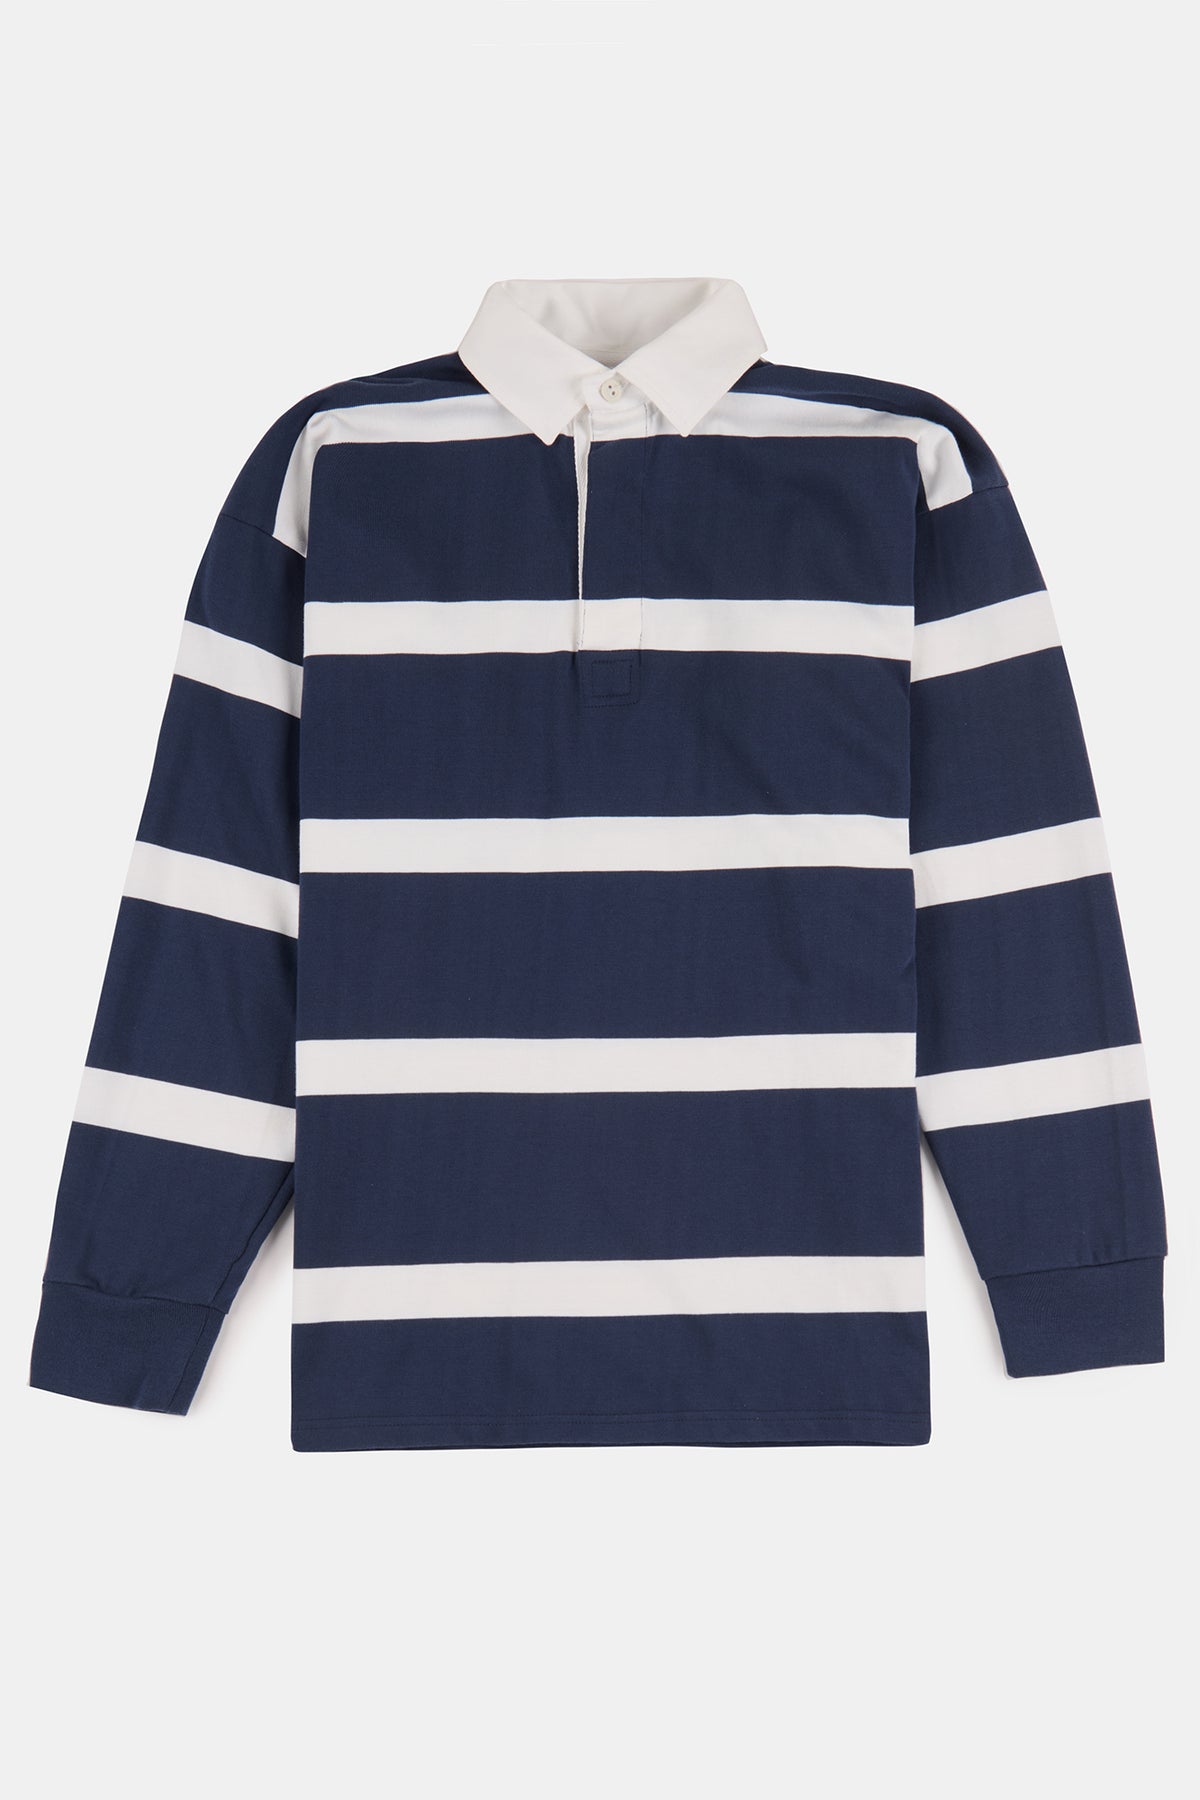 
            Flatlay product shot of unisex fine striped rugby shirt in navy and white